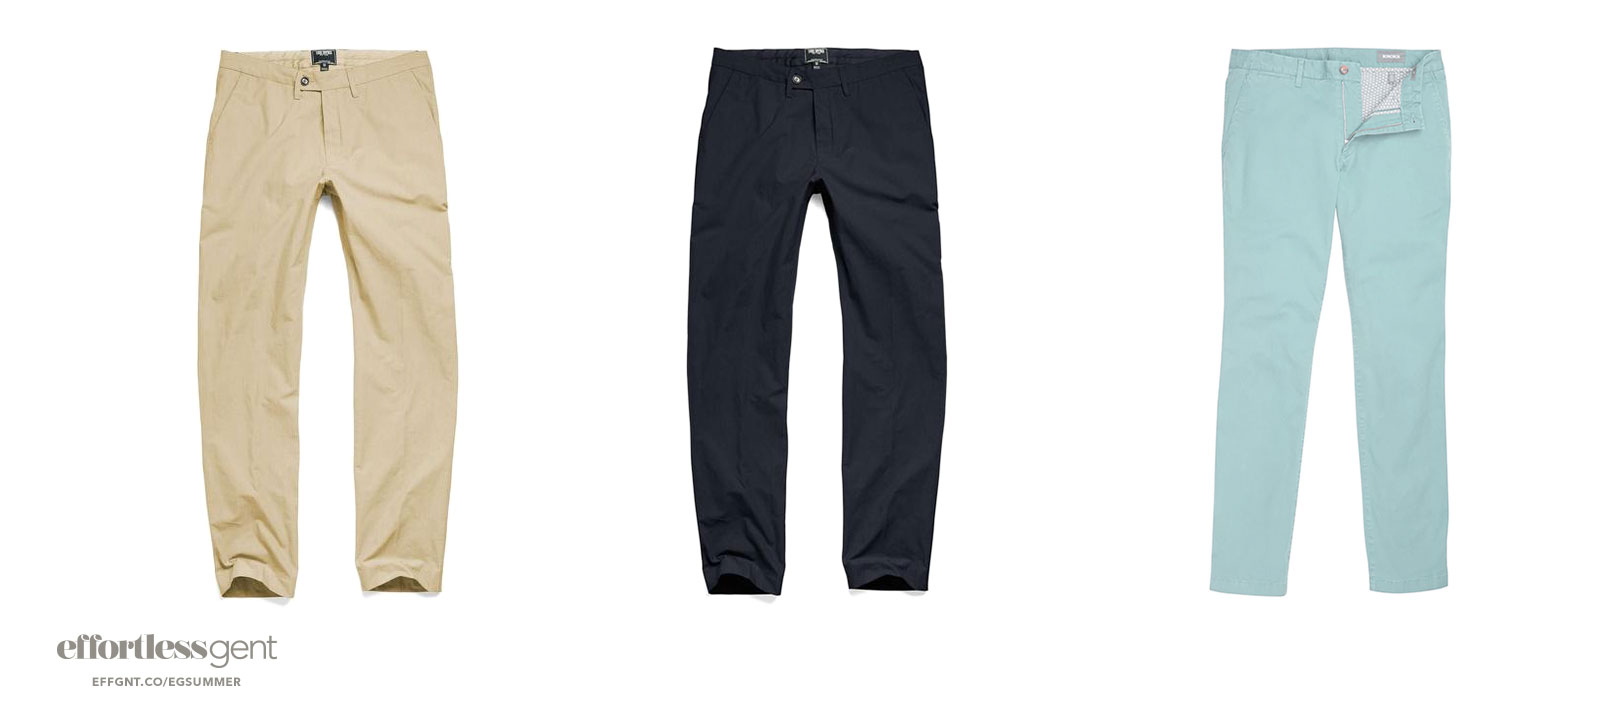 chinos - the best mens chinos